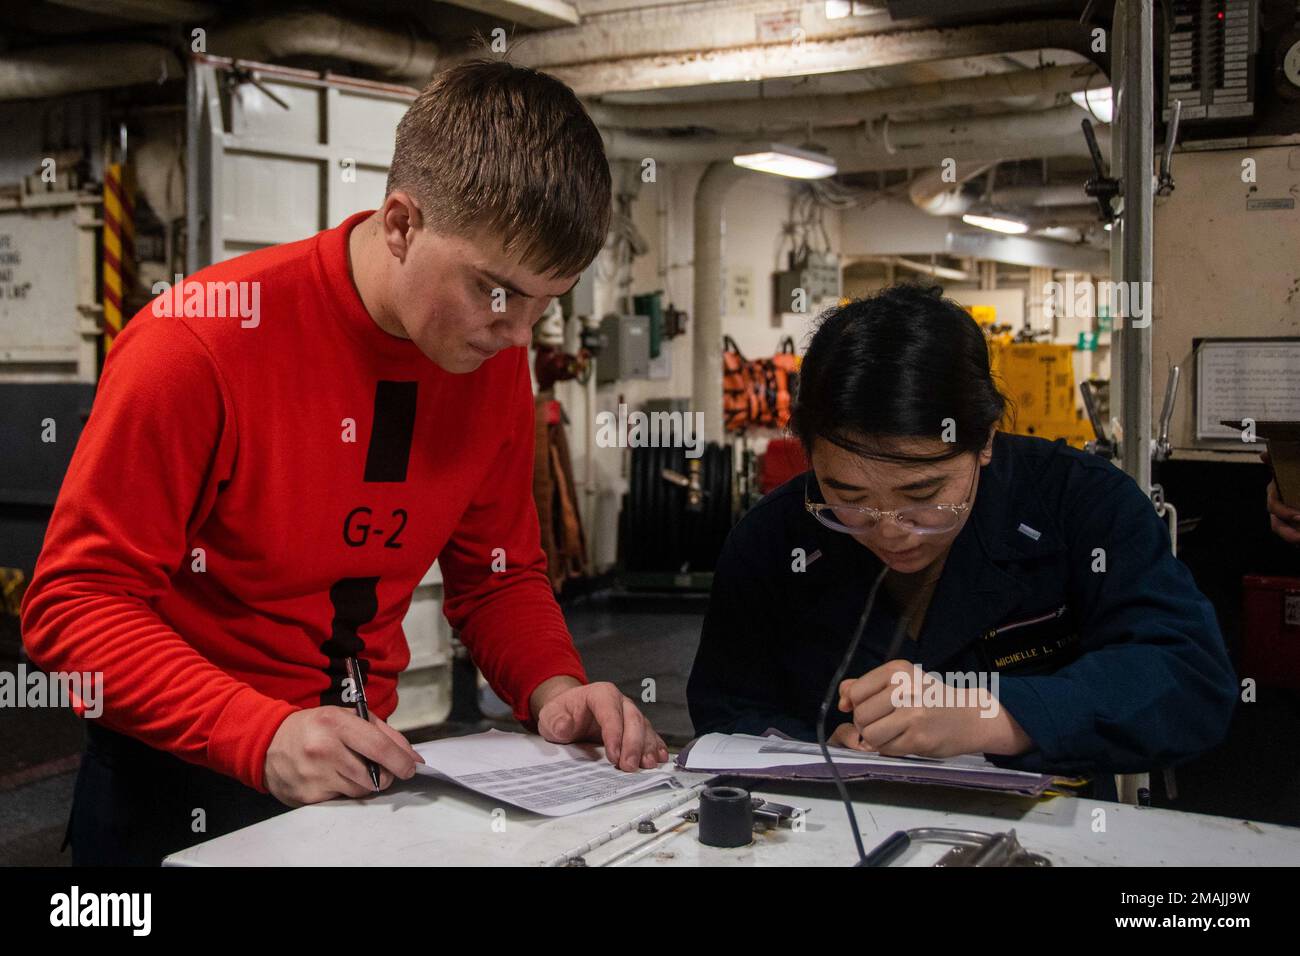 220528-N-GN523-1162 PHILIPPINE SEA (May 28, 2022) Gunner’s Mate 2nd Class Braden McDonald, left, from Colquitt, Georgia and Lt. j.g. Michelle Tran, from Centreville, Virginia perform maintenance in the hangar bay of the U.S. Navy’s only forward-deployed aircraft carrier USS Ronald Reagan (CVN 76). Ronald Reagan Sailors conduct routine maintenance at sea to sustain mission readiness. Ronald Reagan, the flagship of Carrier Strike Group 5, provides a combat-ready force that protects and defends the United States, and supports alliances, partnerships and collective maritime interests in the Indo-P Stock Photo